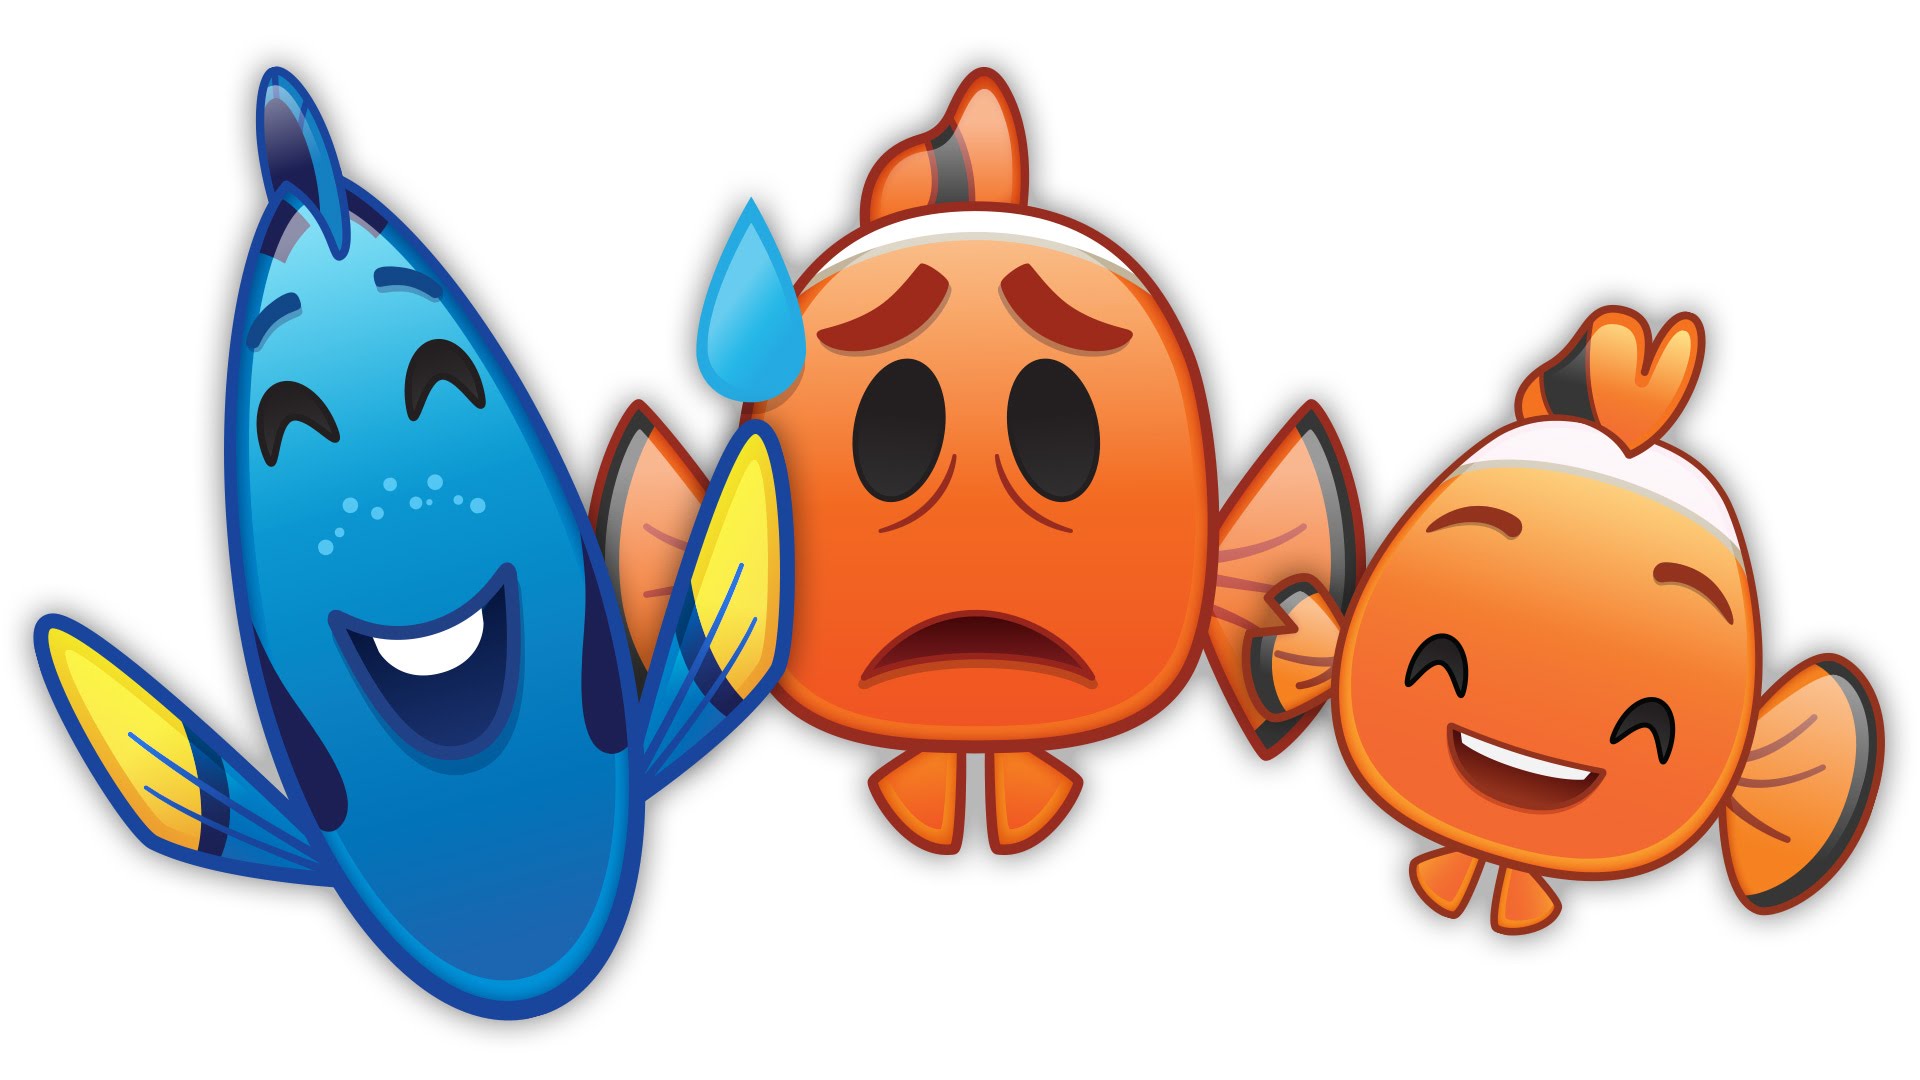 Relive the Story of ‘Finding Nemo’ Through Emoji